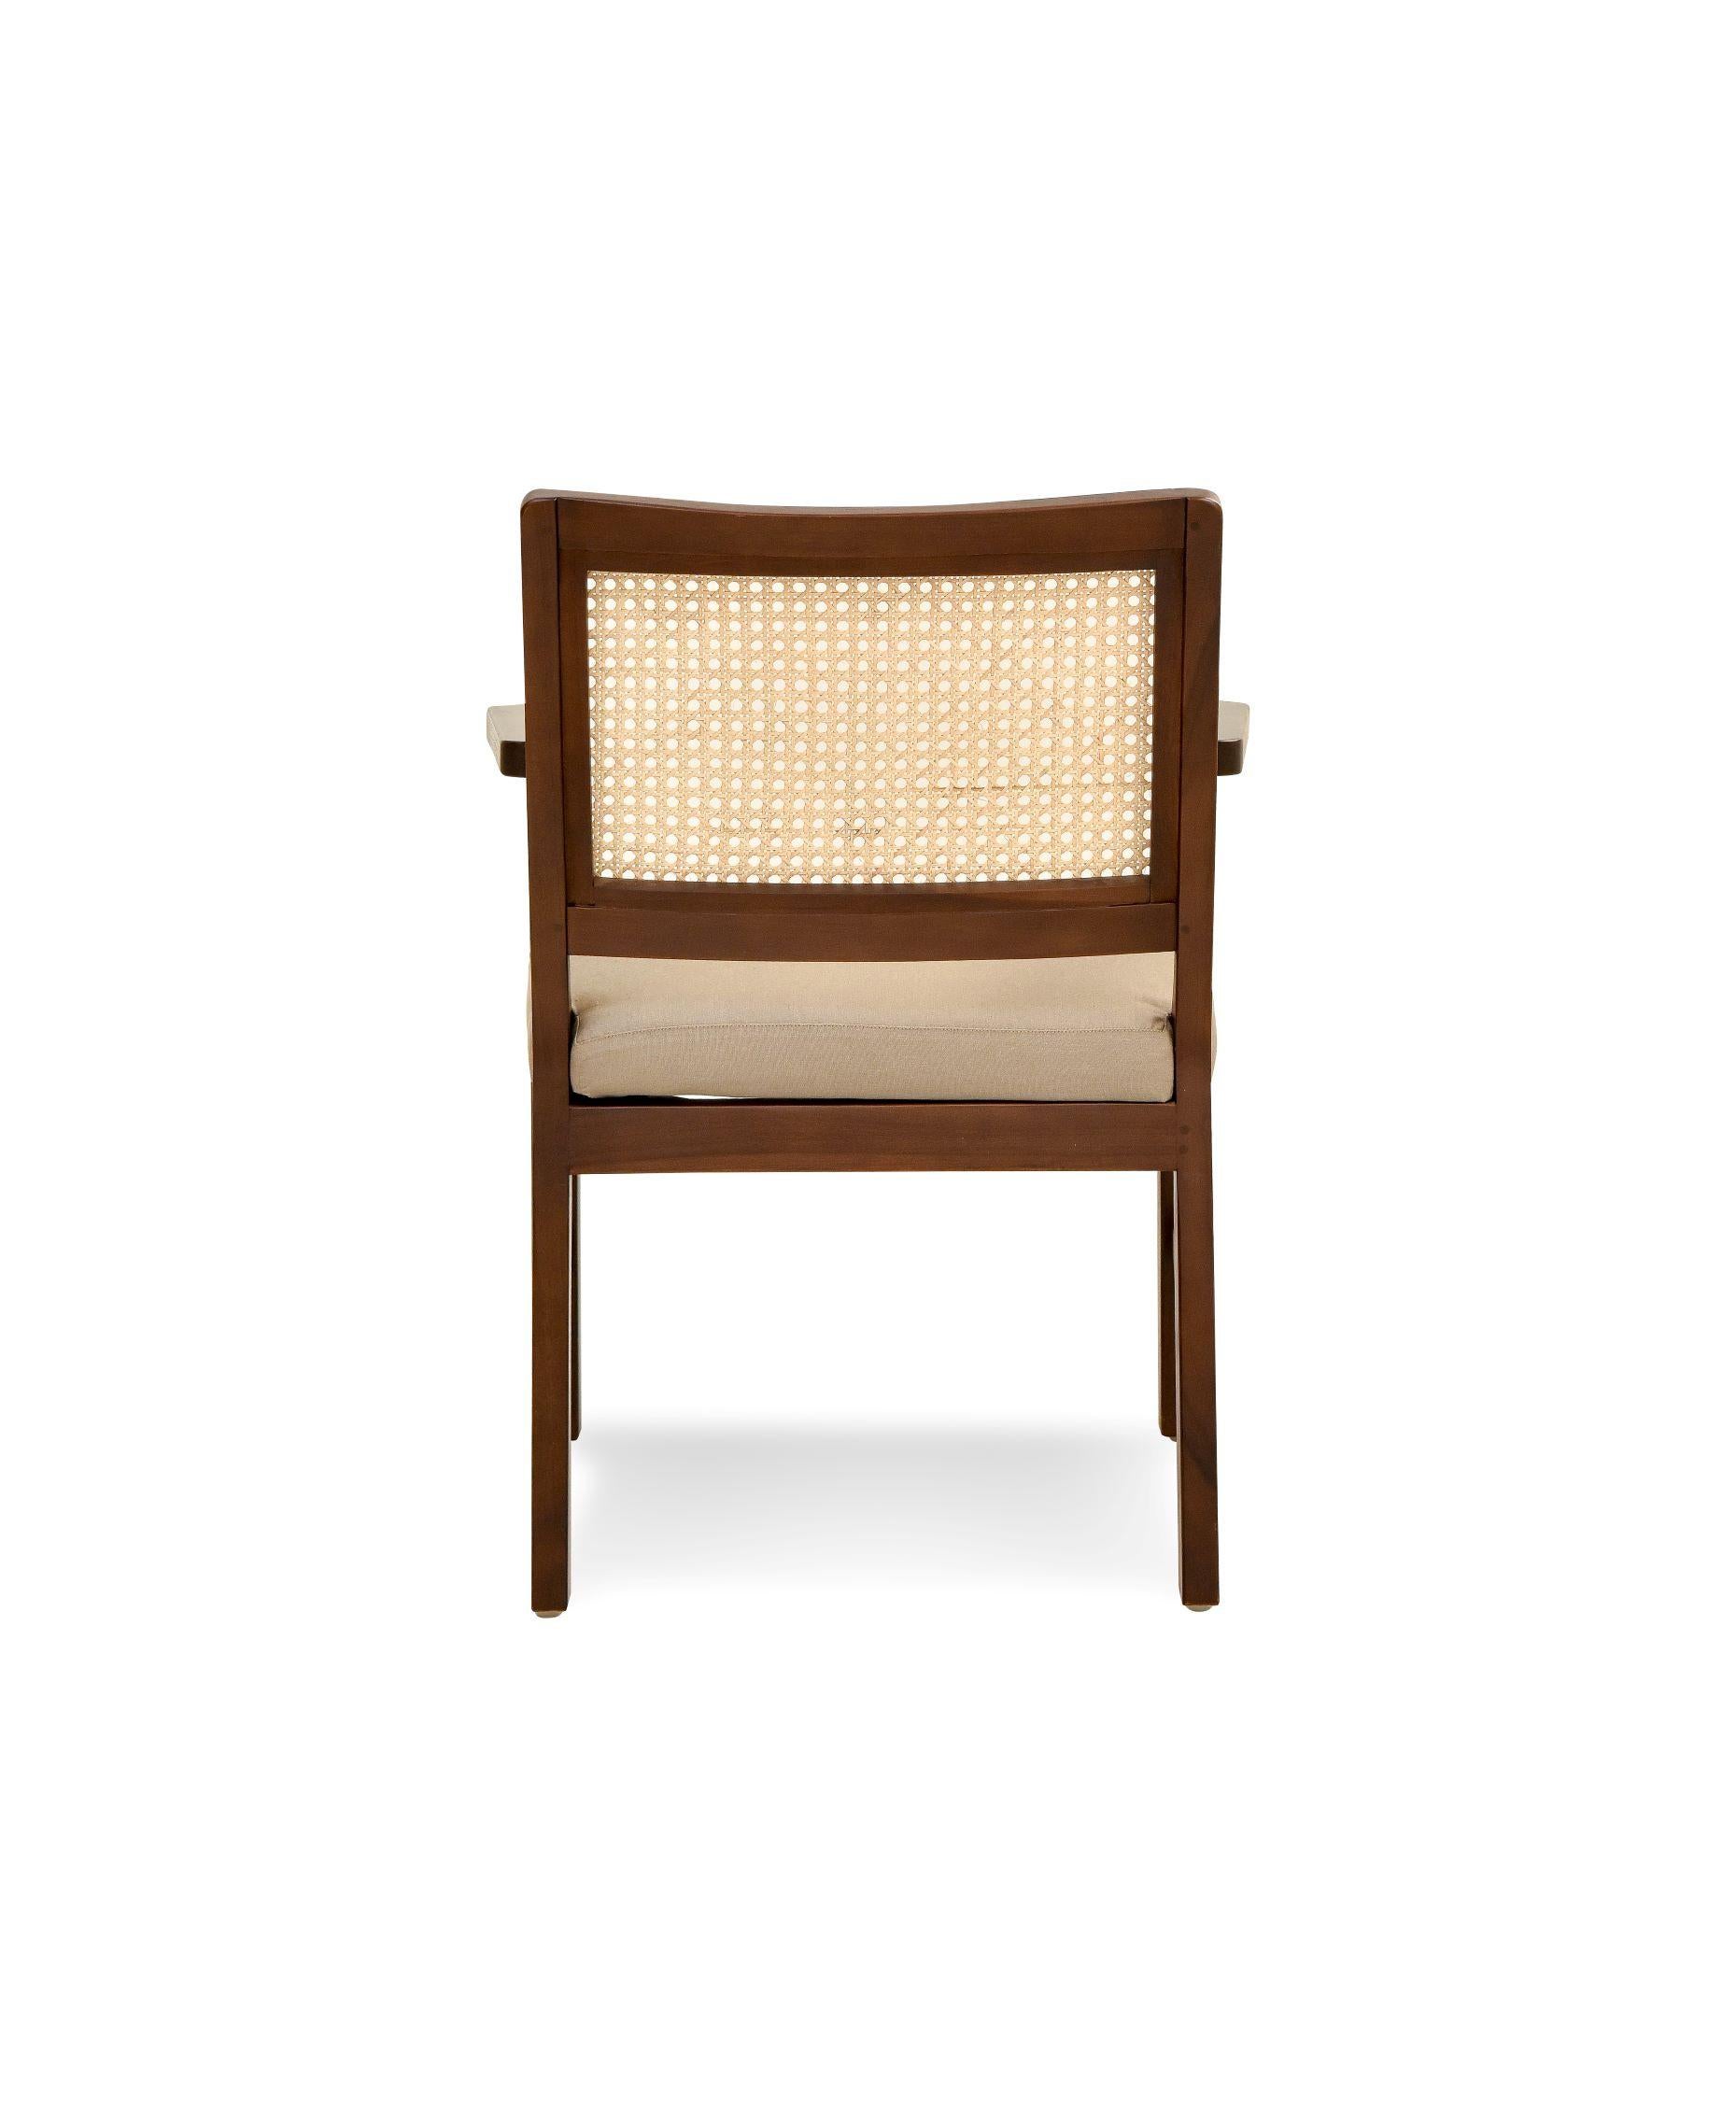 Rattan Teak Armchair with Woven Cane Back in a Walnut Finish For Sale